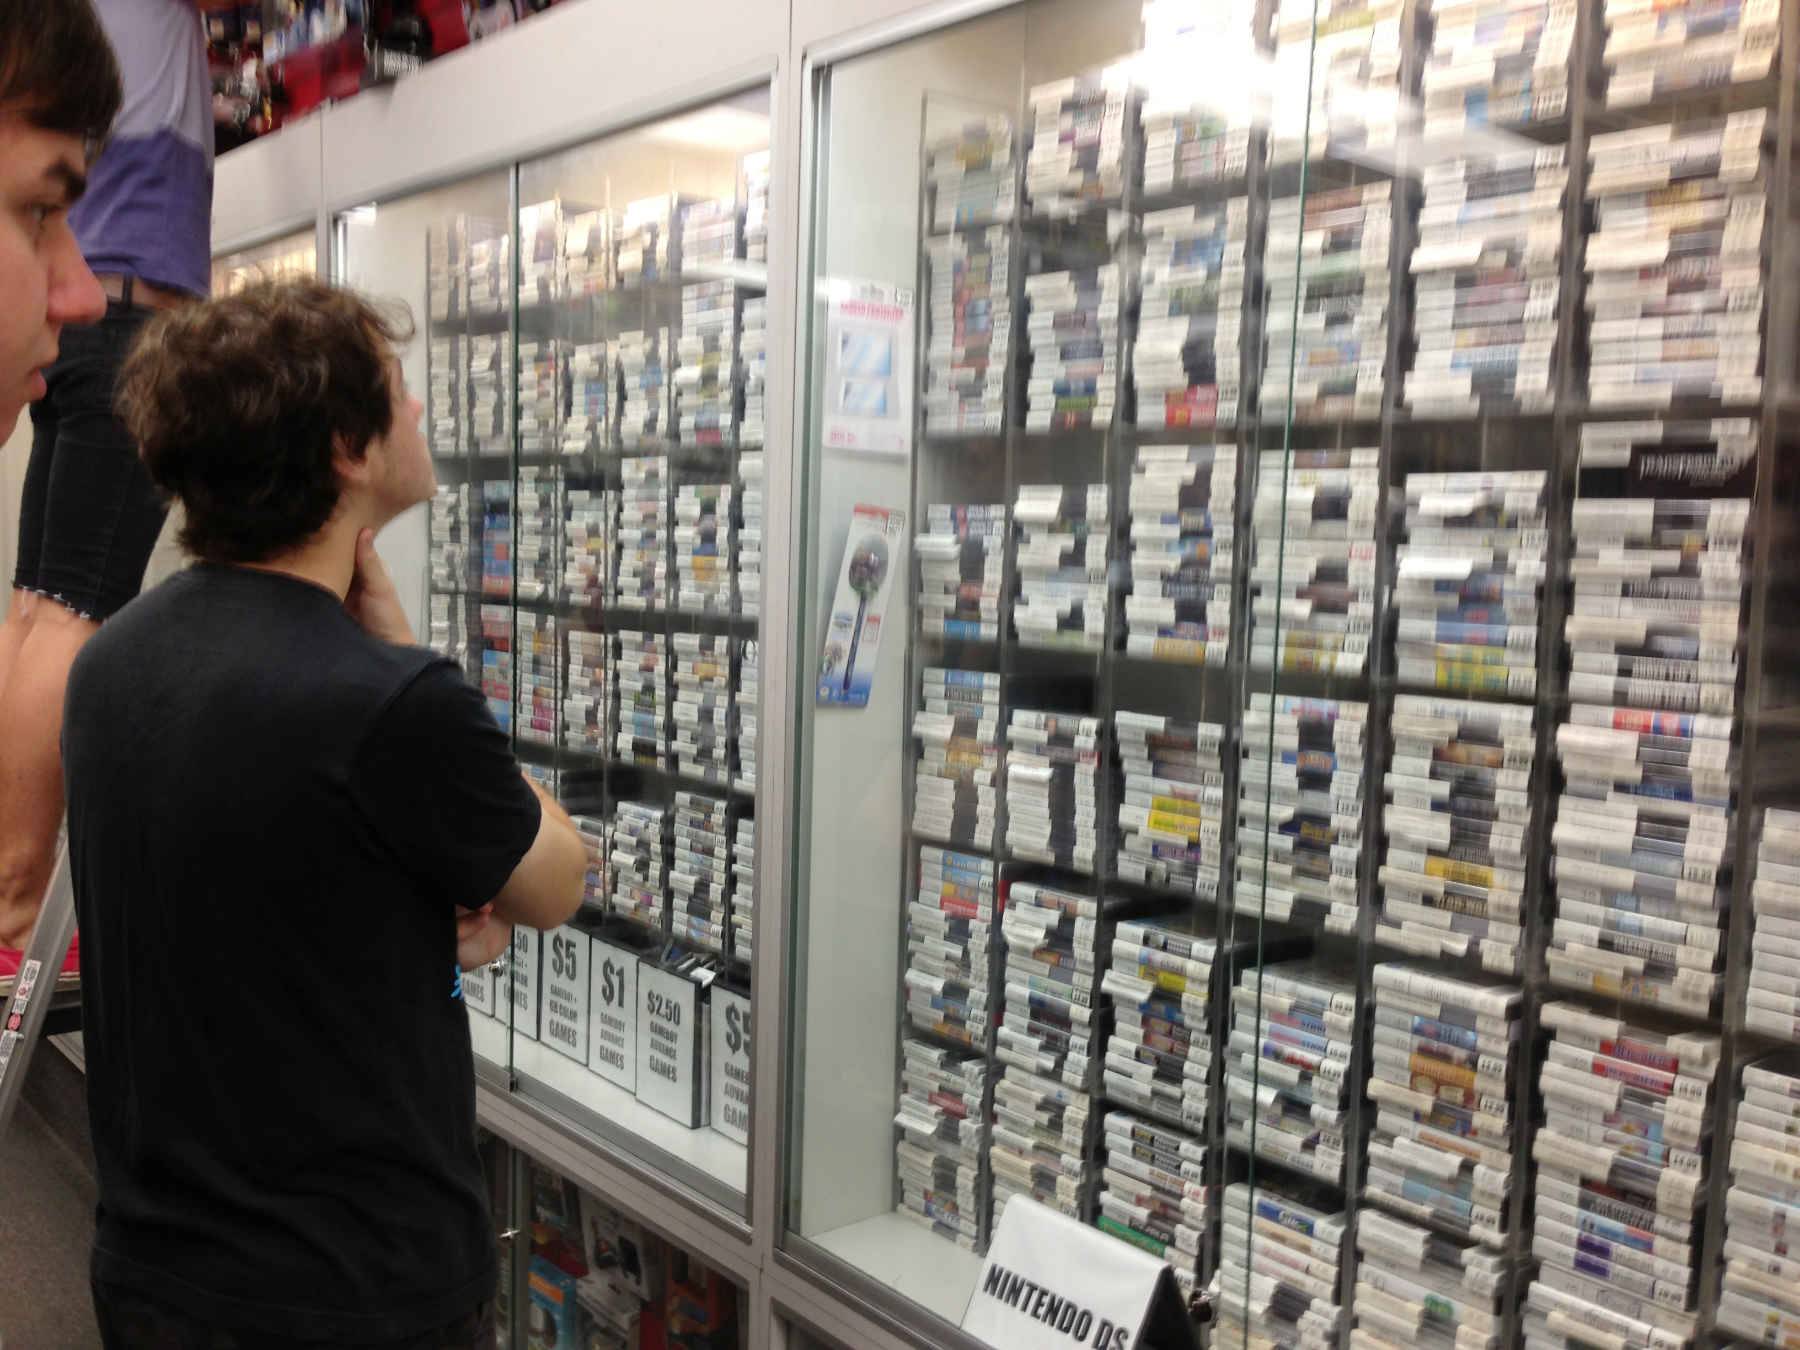 Richard scanning the secondhand videogames